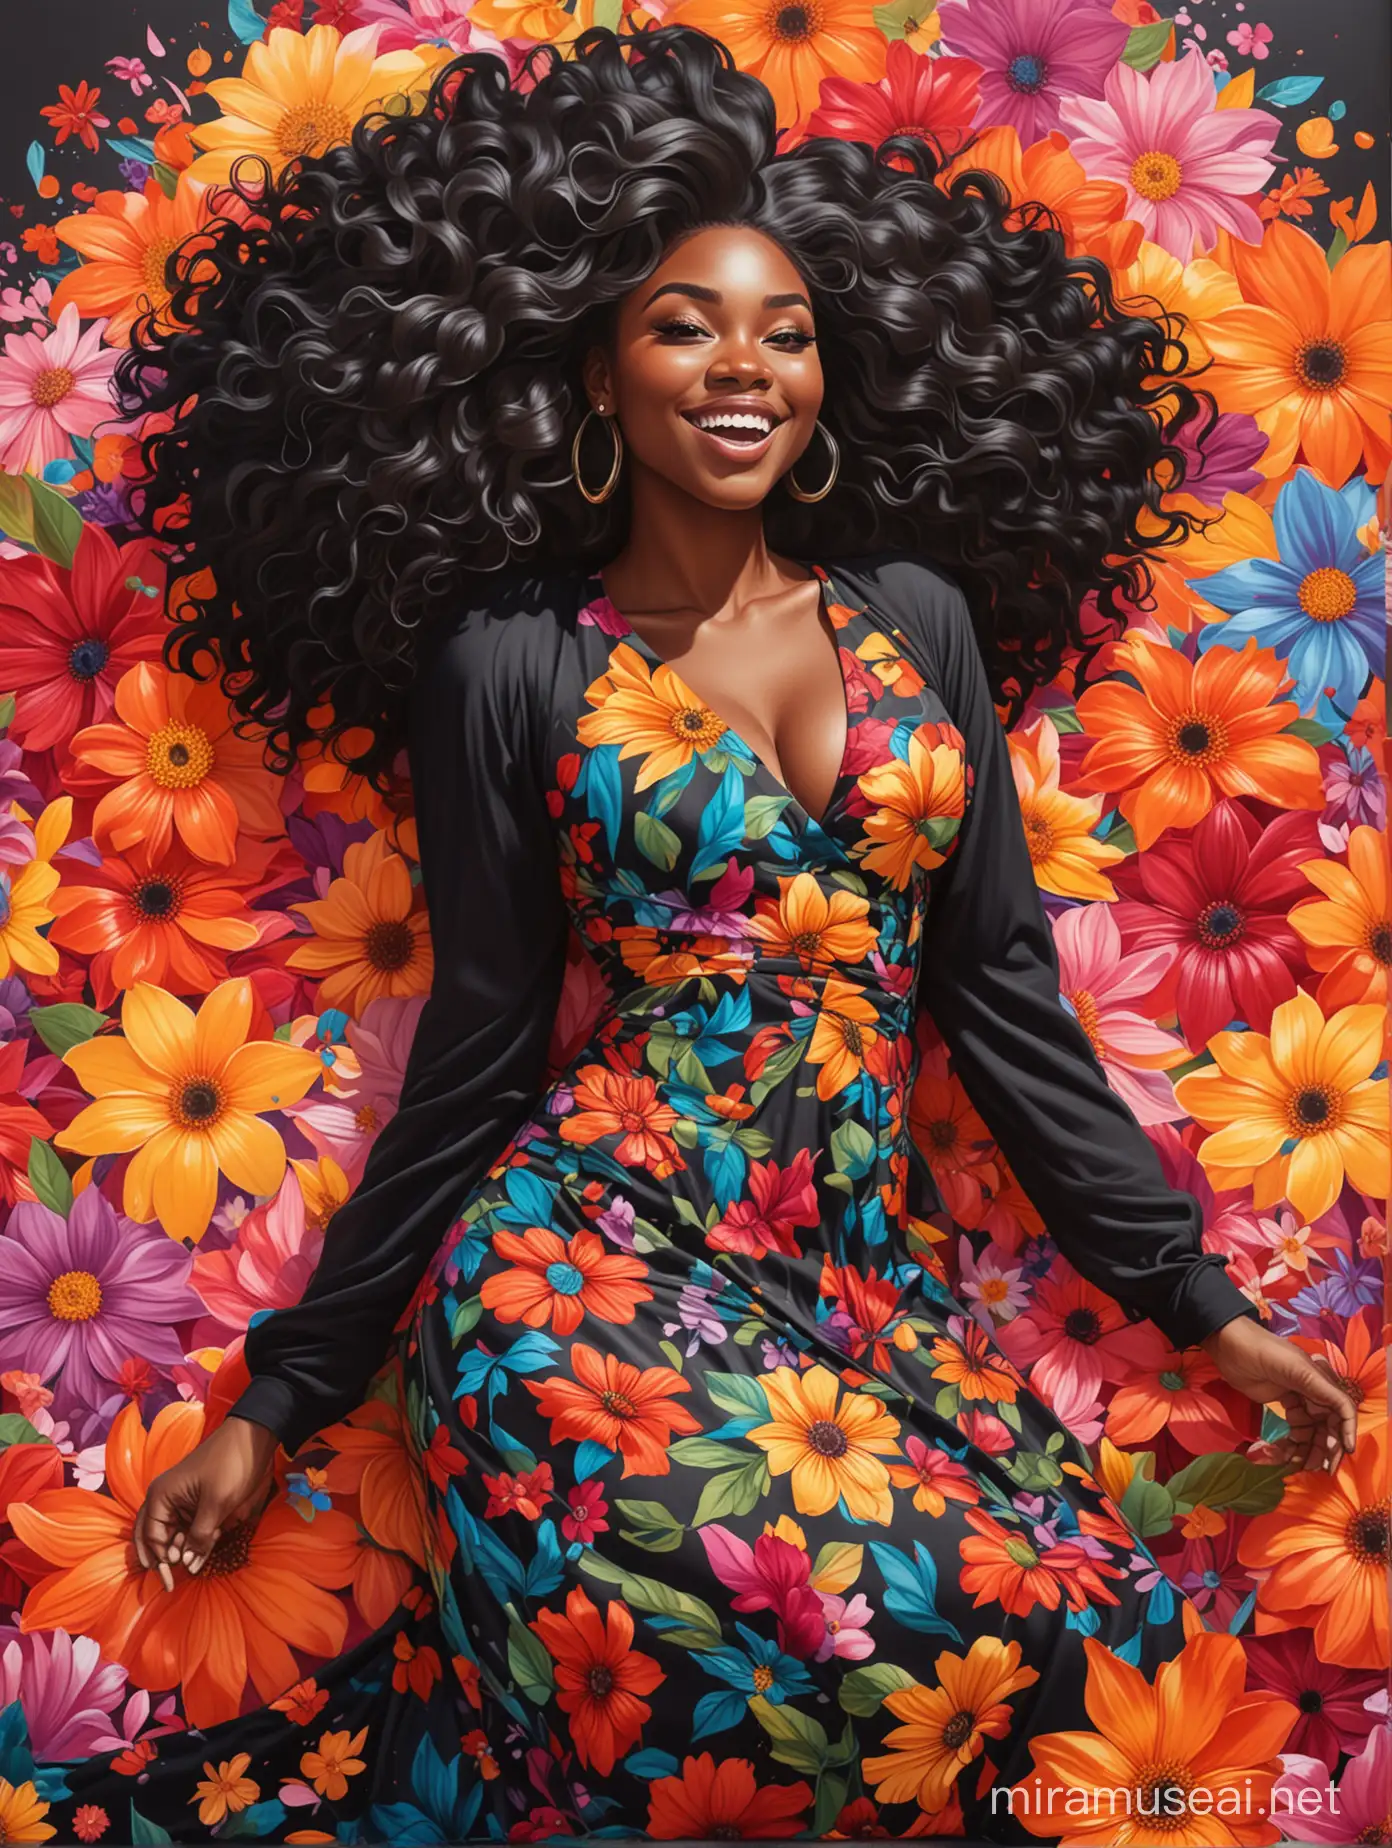 Confident Black Woman Lounging Among Colorful Flower Petals